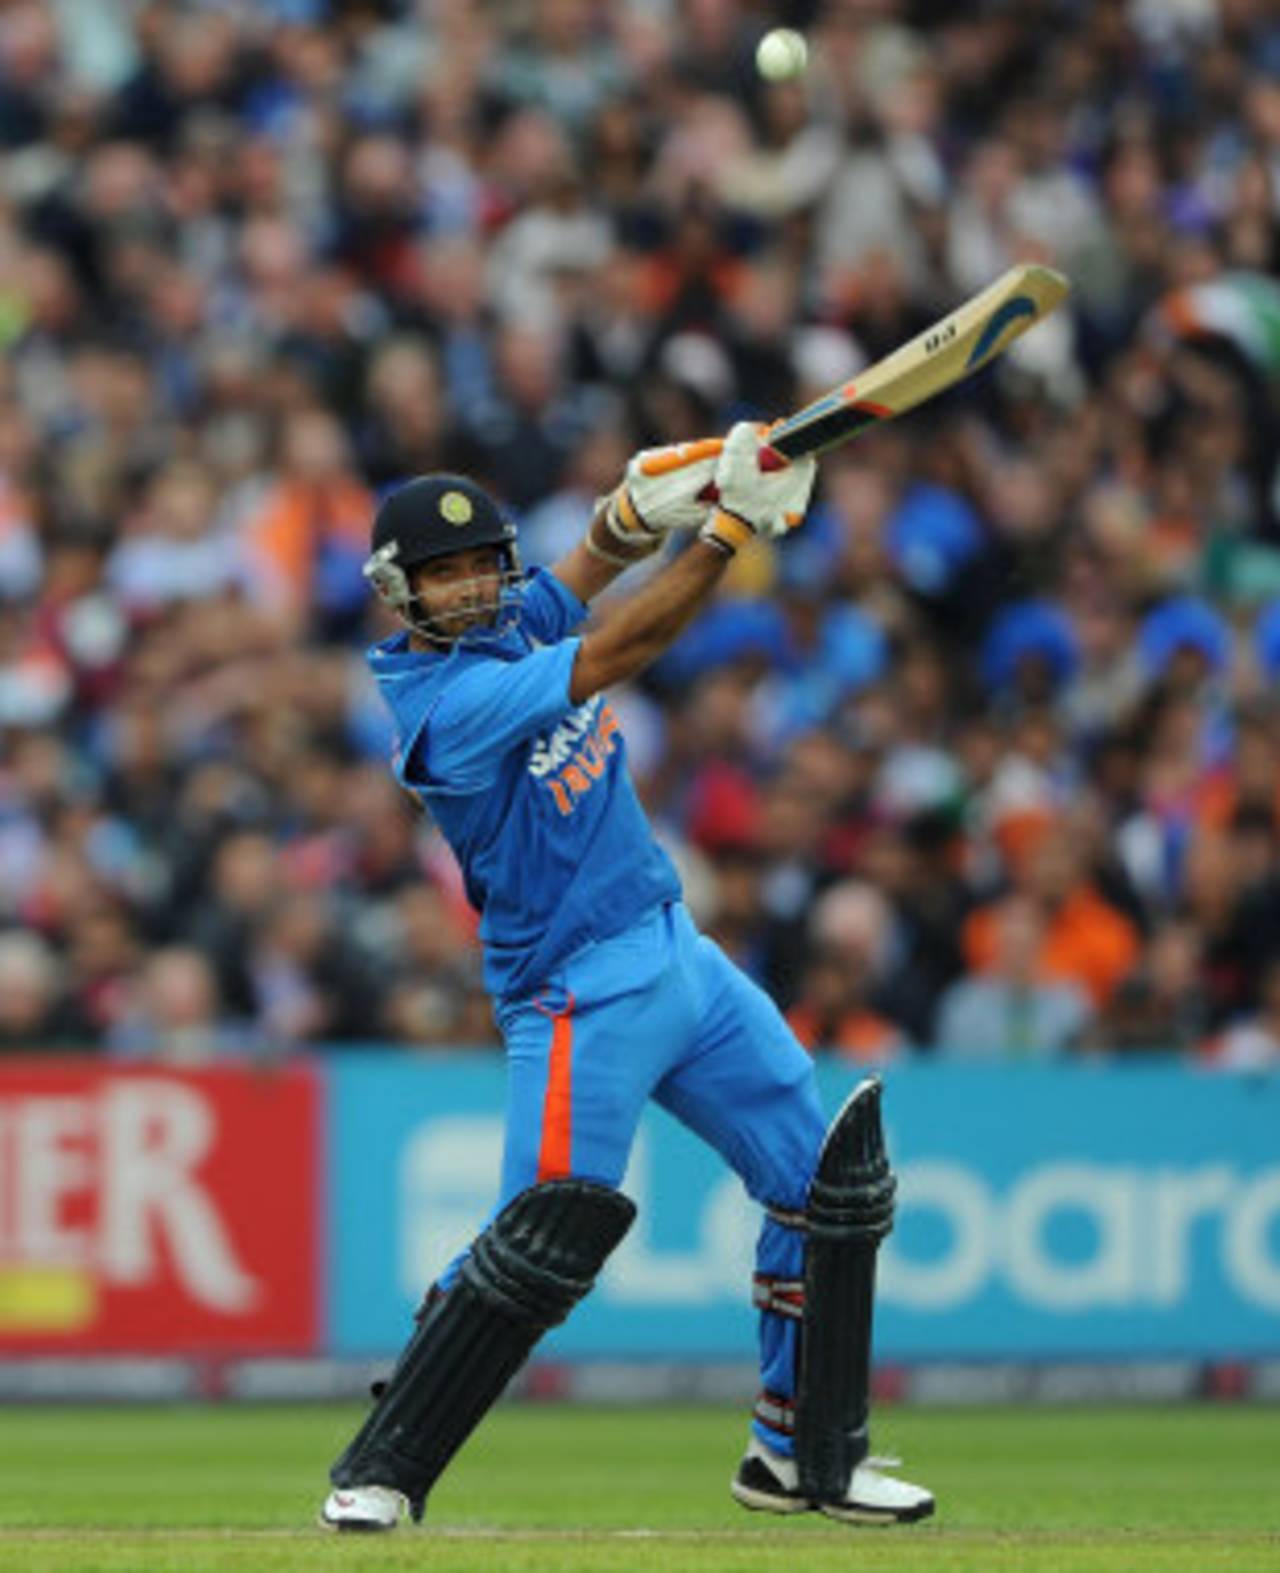 Ajinkya Rahane drives over the off side during his exciting innings, England v India, Twenty20, Old Trafford, August 31, 2011